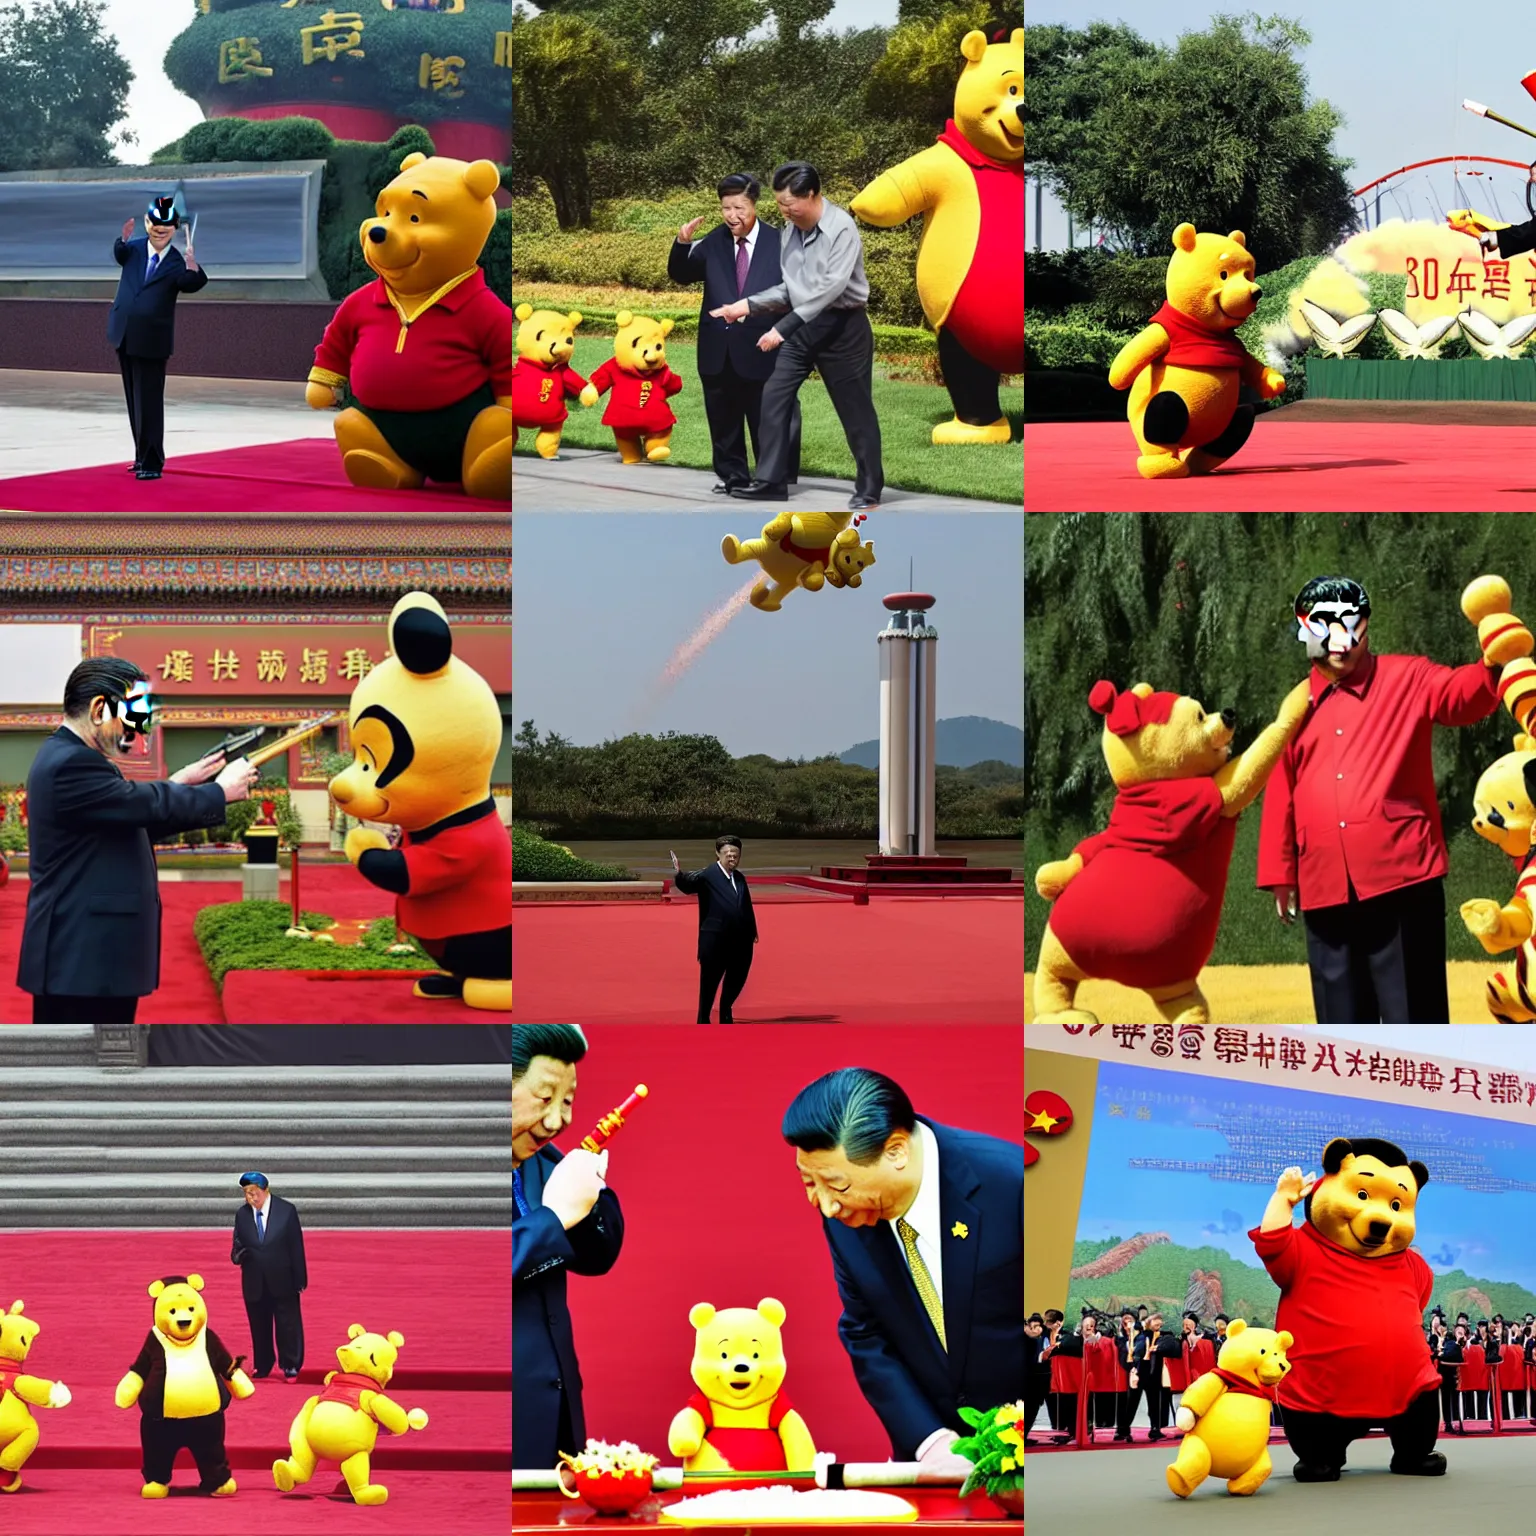 Prompt: xi jinping aiming a rocket launcher at winnie the pooh